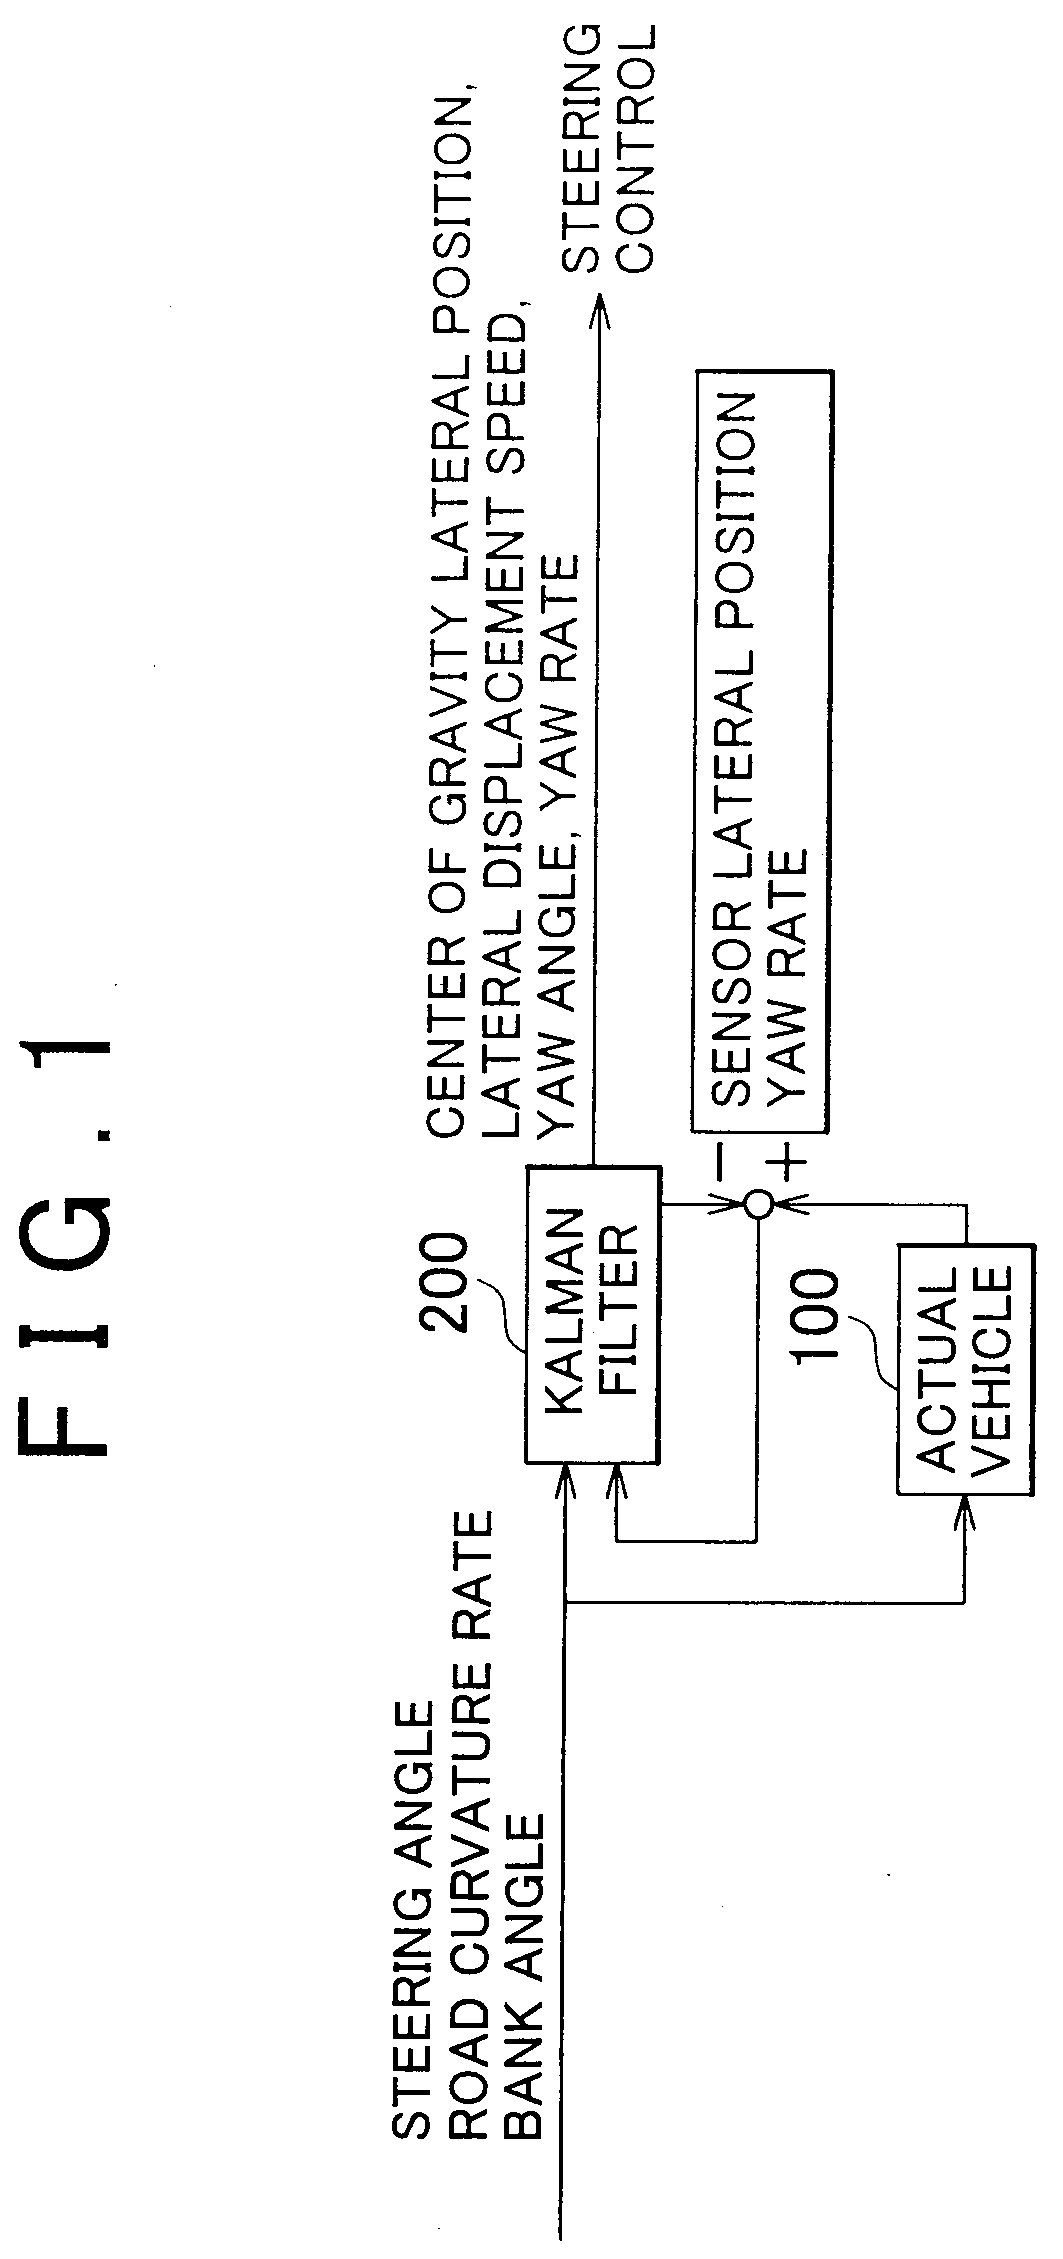 Vehicle State Quantity Predicting Apparatus and Vehicle Steering Controller Using the Same, and a Method for Predicting a Vehicle State Quantity and Vehicle Steering Controlling Method Using the Same